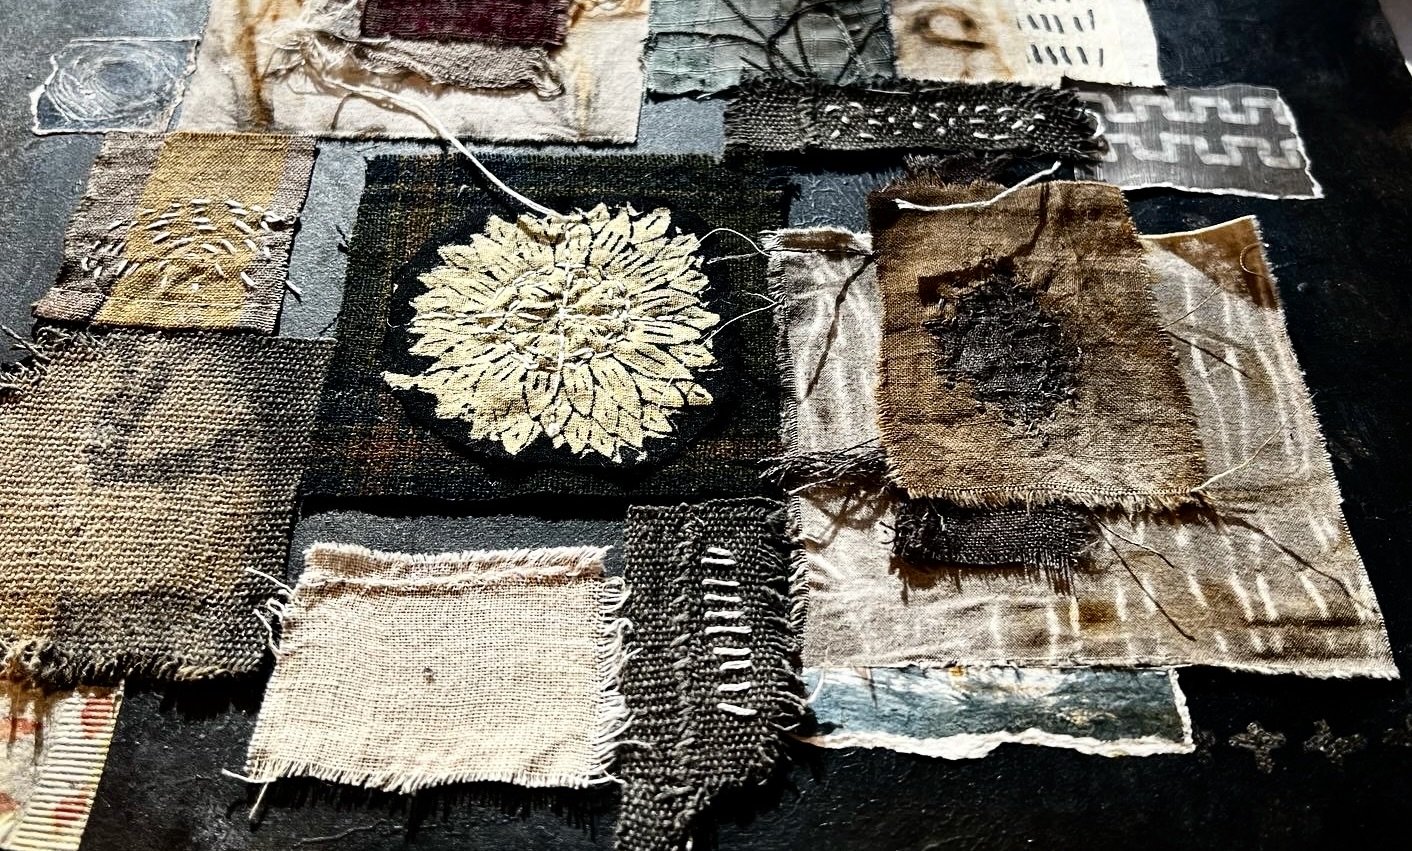 Mixed Media collage by Roxanne Evans Stout